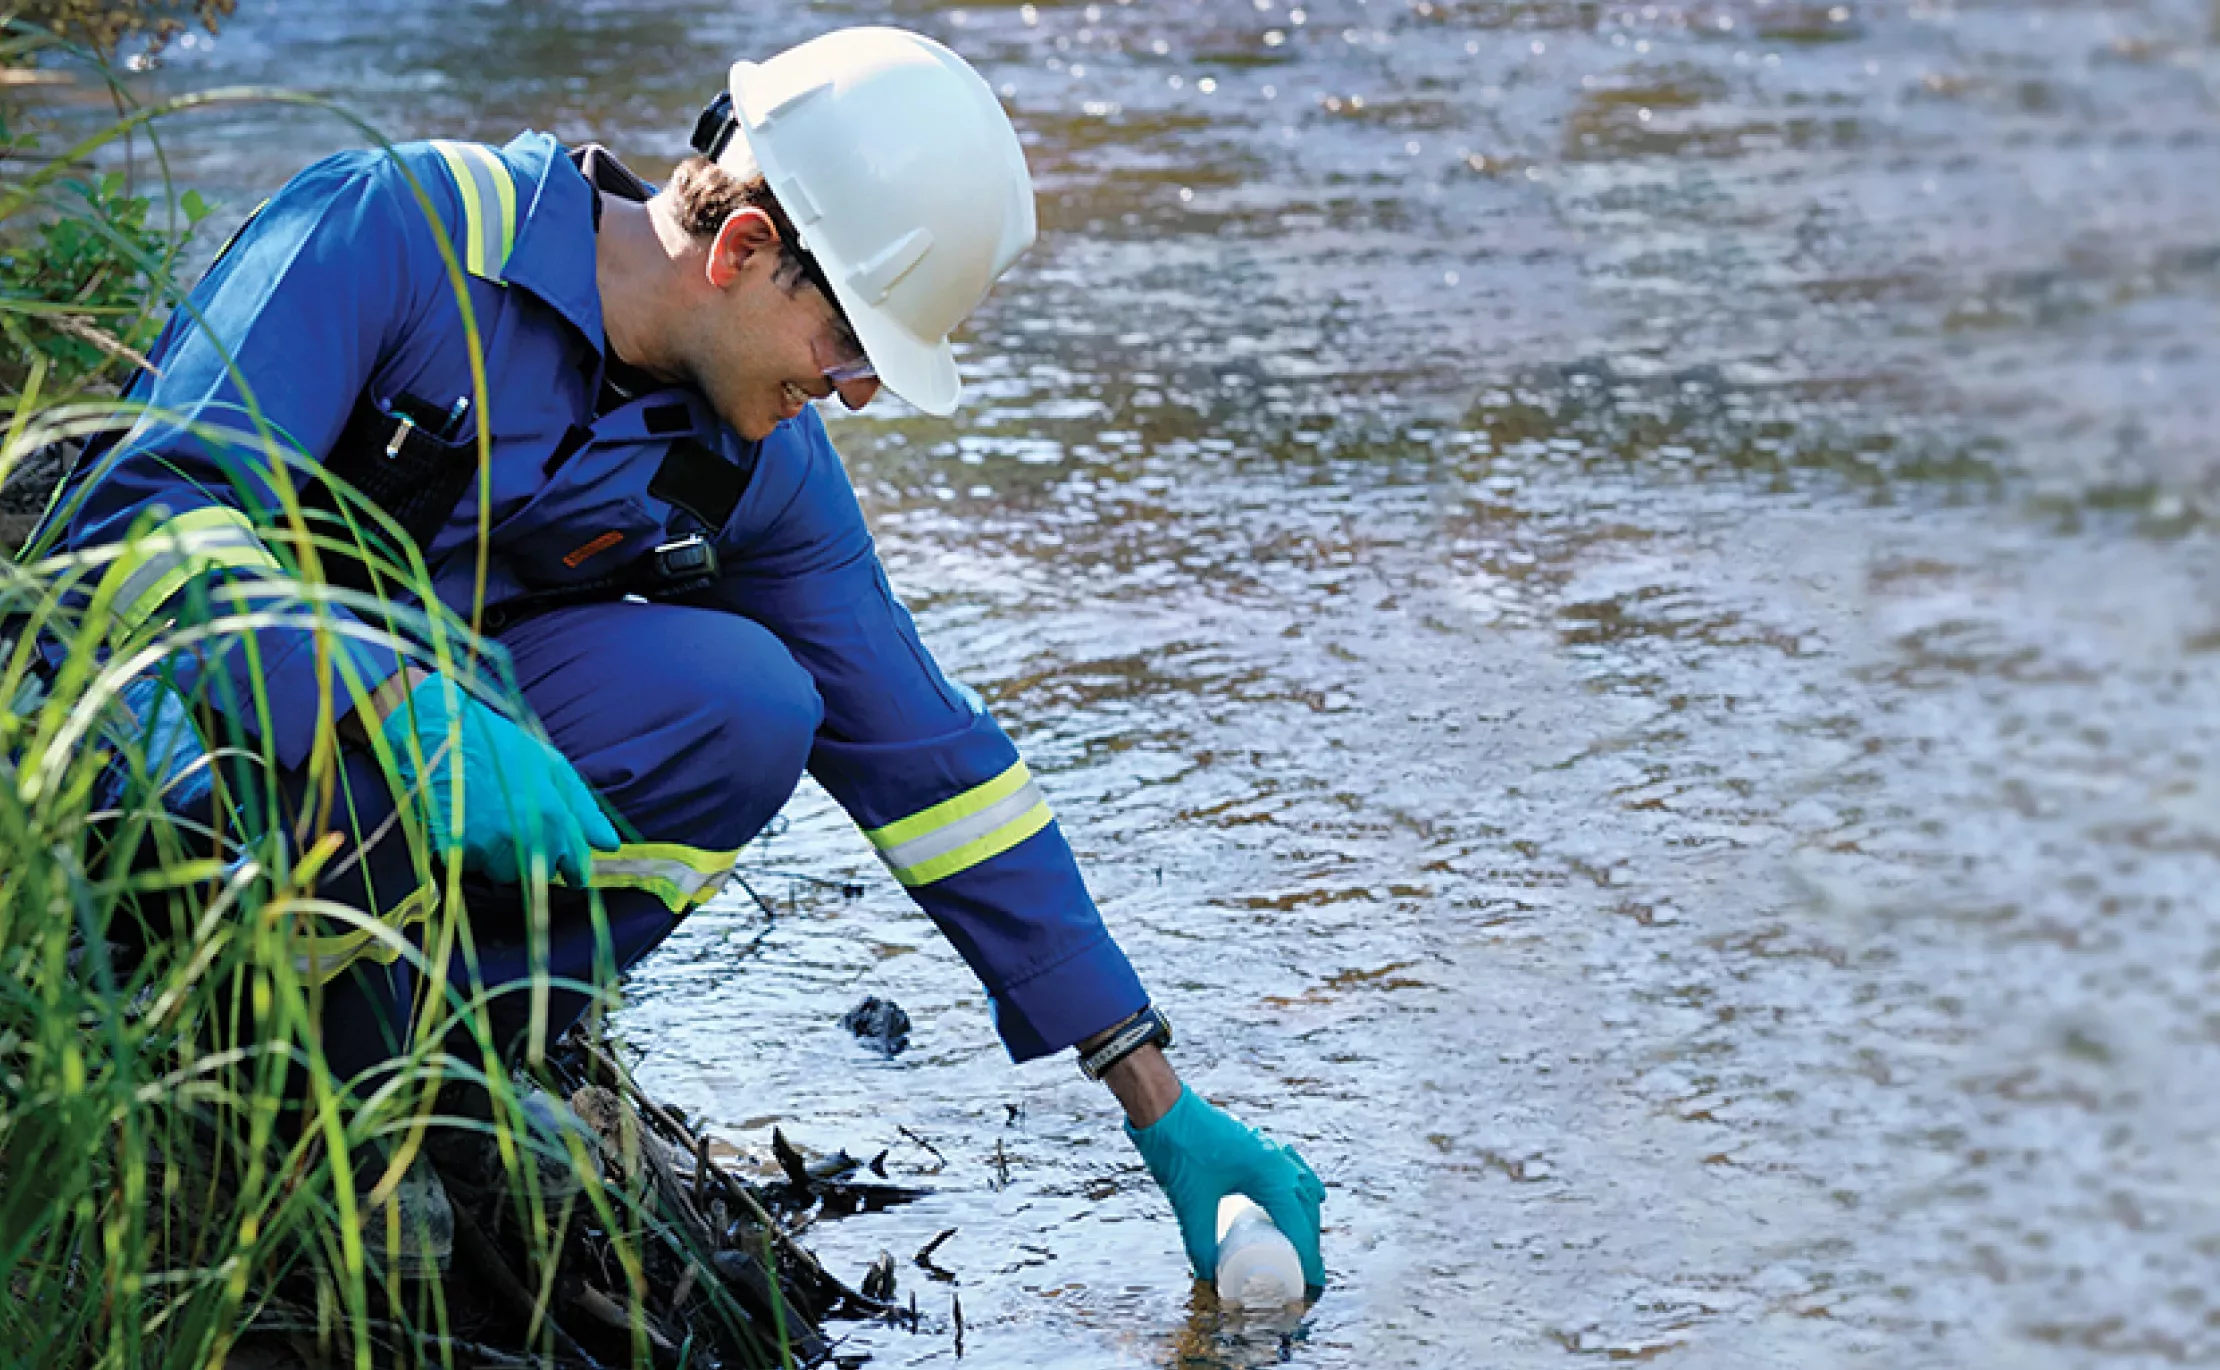 Person in blue uniform and gloves, crouching next to a river and retrieving a water sample.